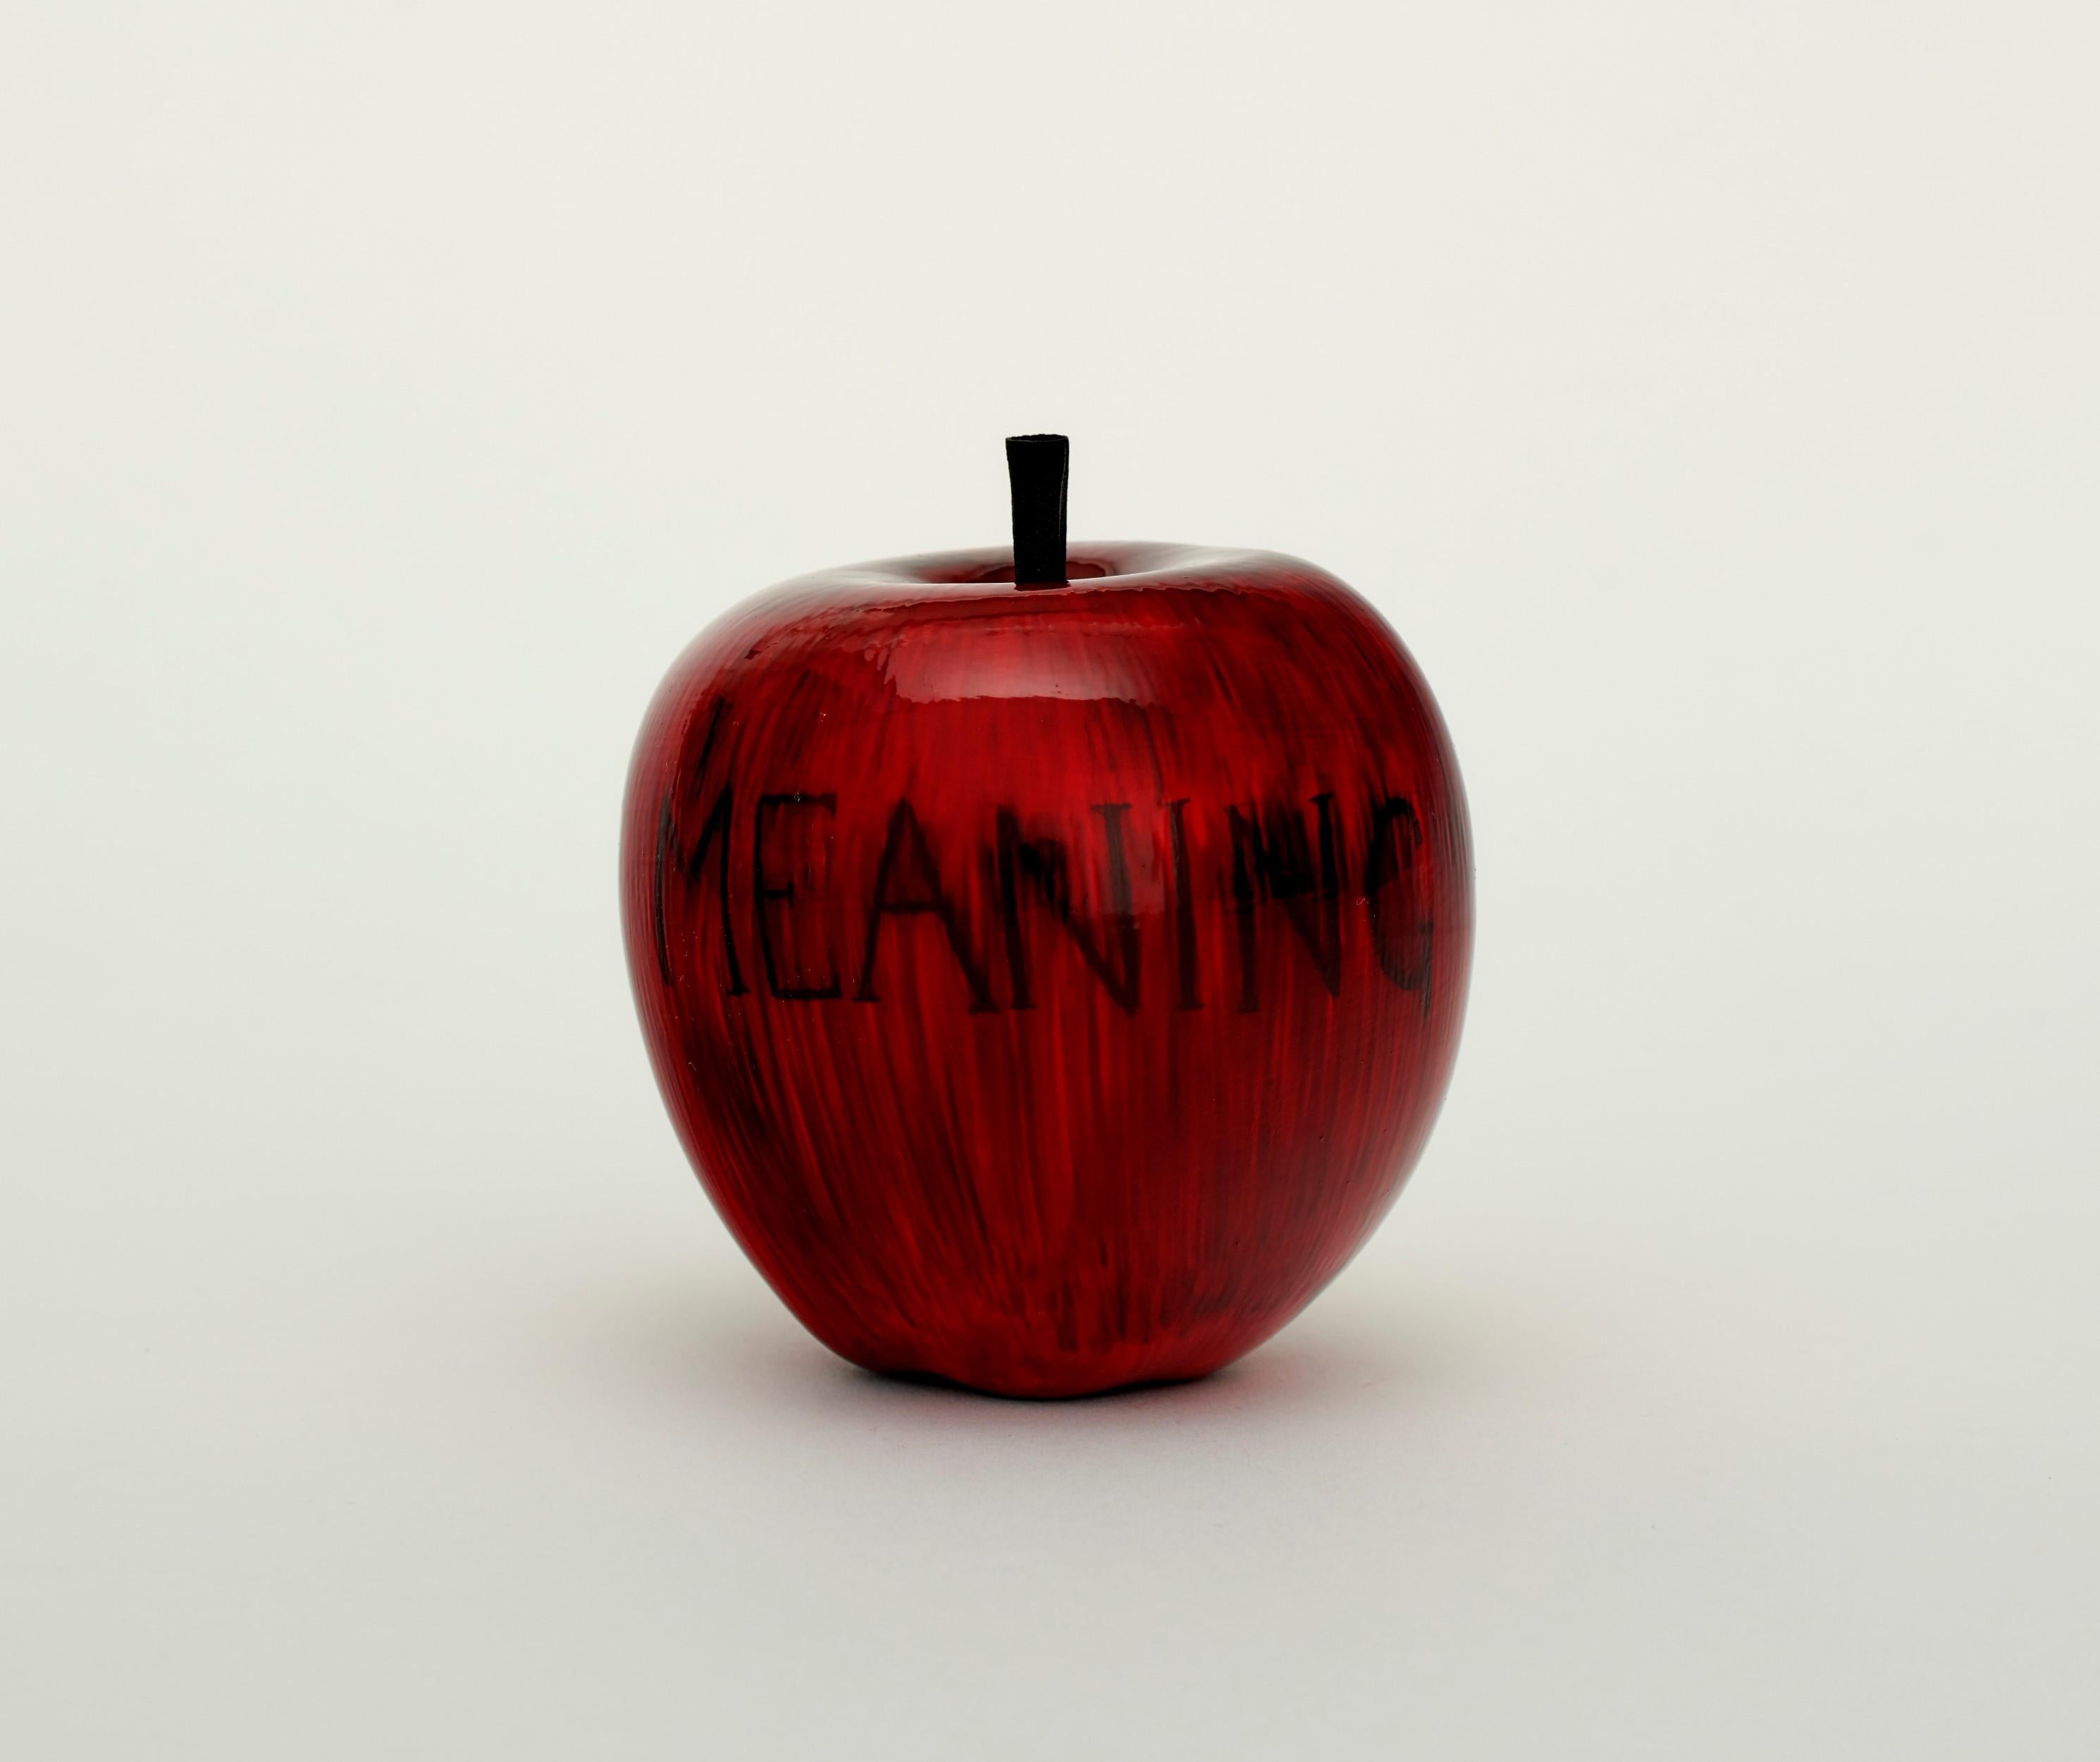 Barnaby Barford Figurative Sculpture - Meaning (Apple)